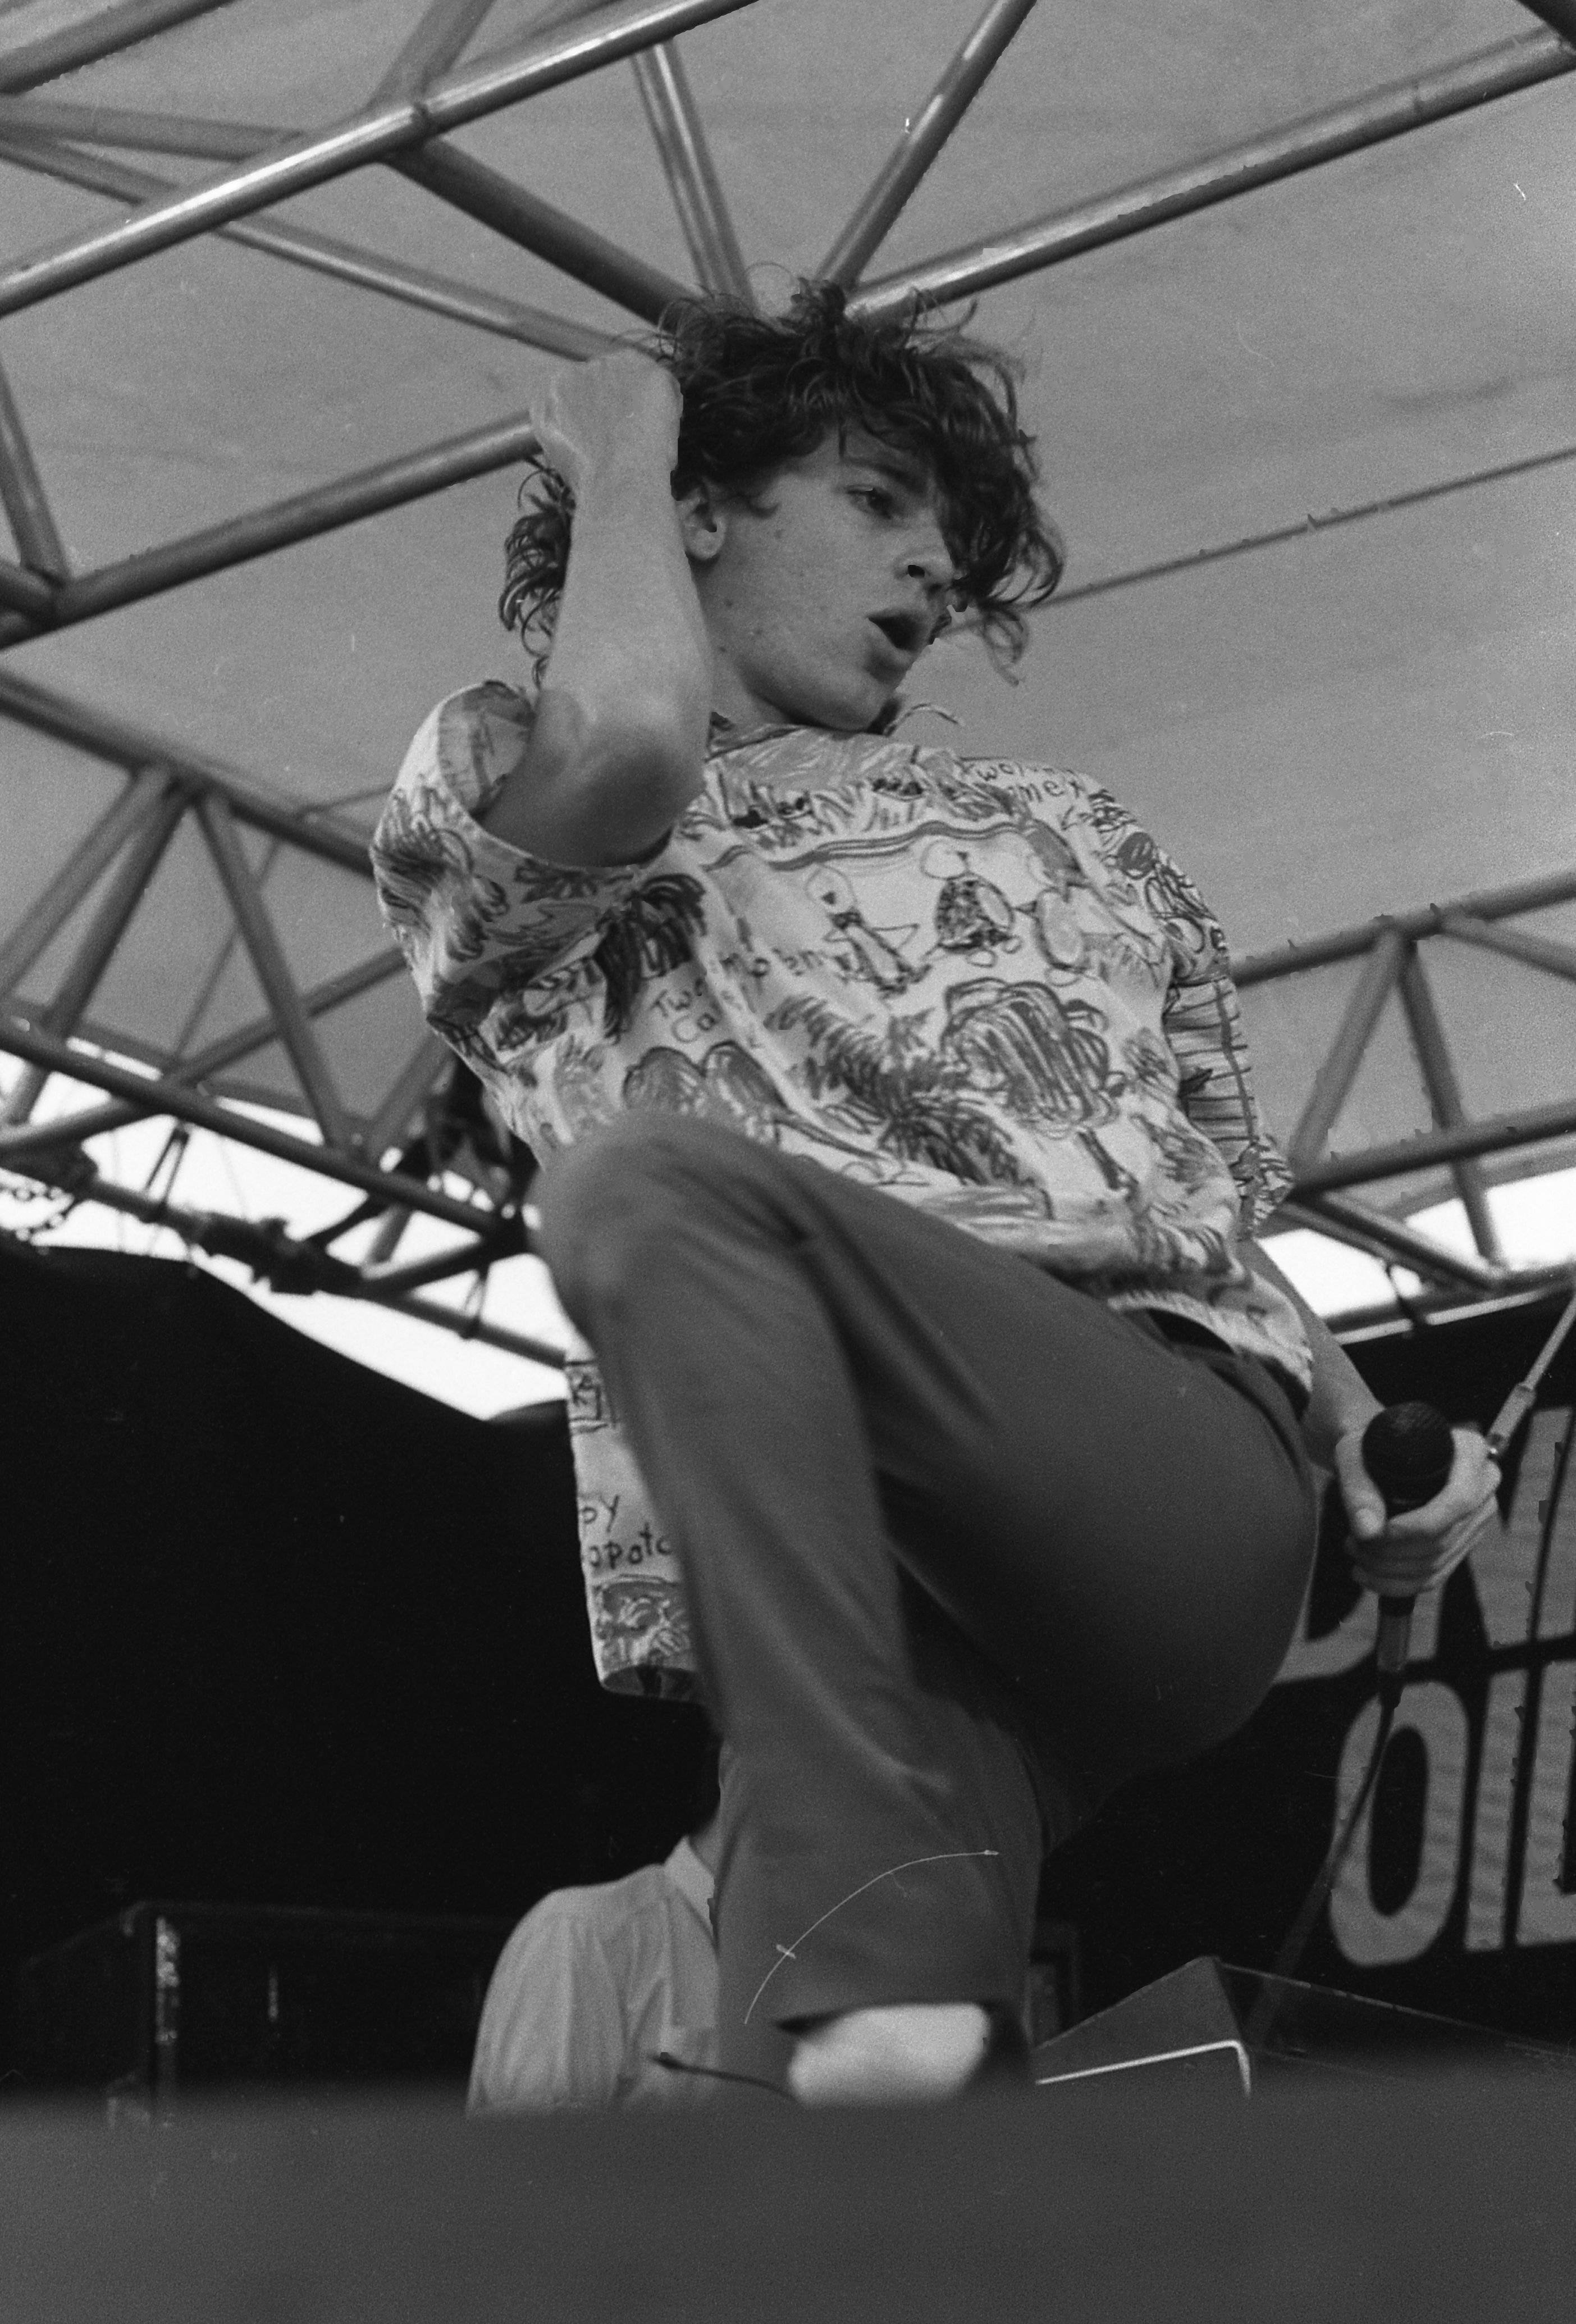 Black and white image of a man in mid dance onstage